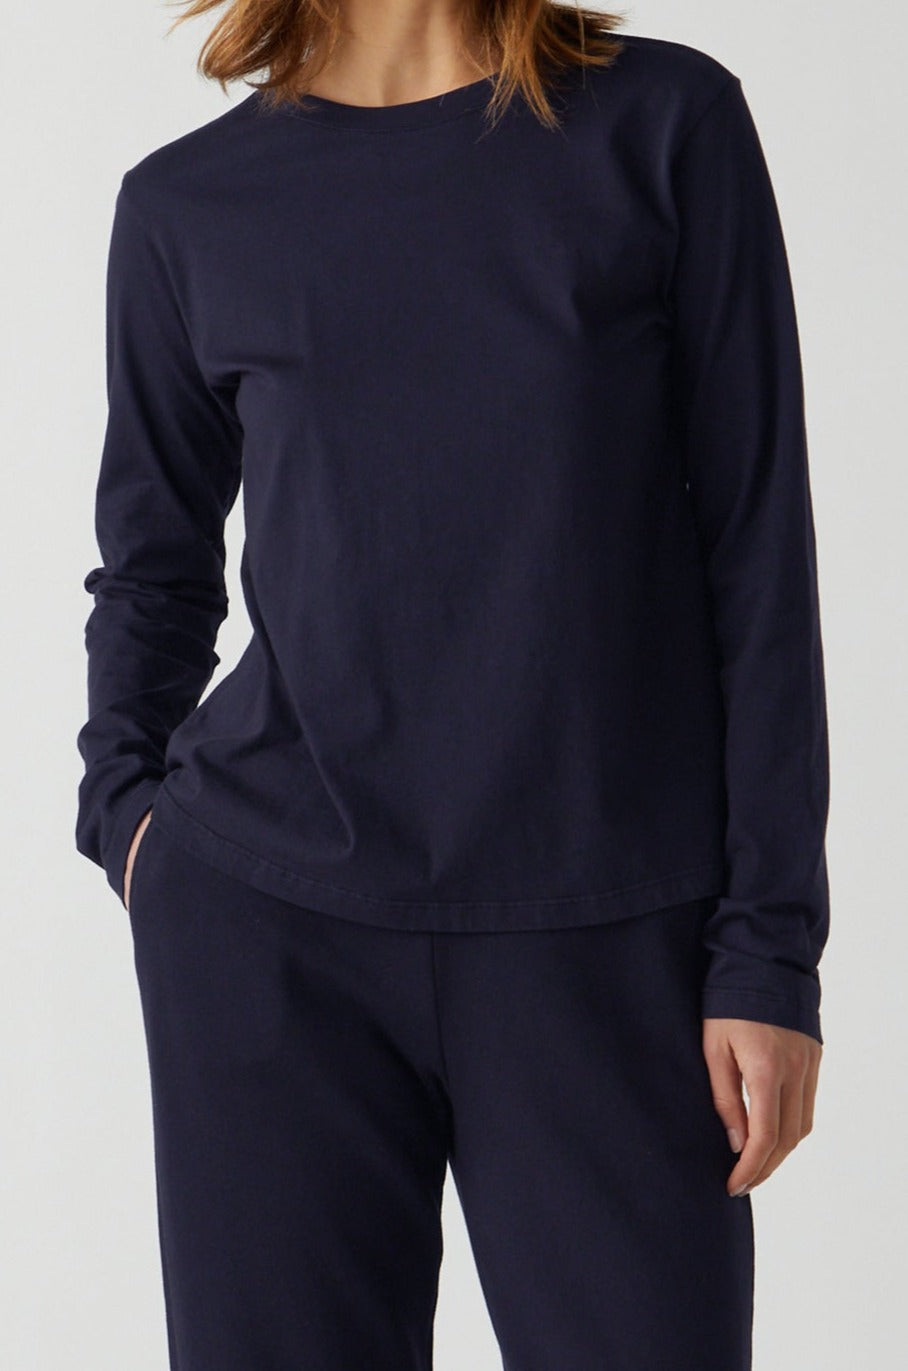 Vicente Tee in navy with Zuma Sweatpant front-26007105831105